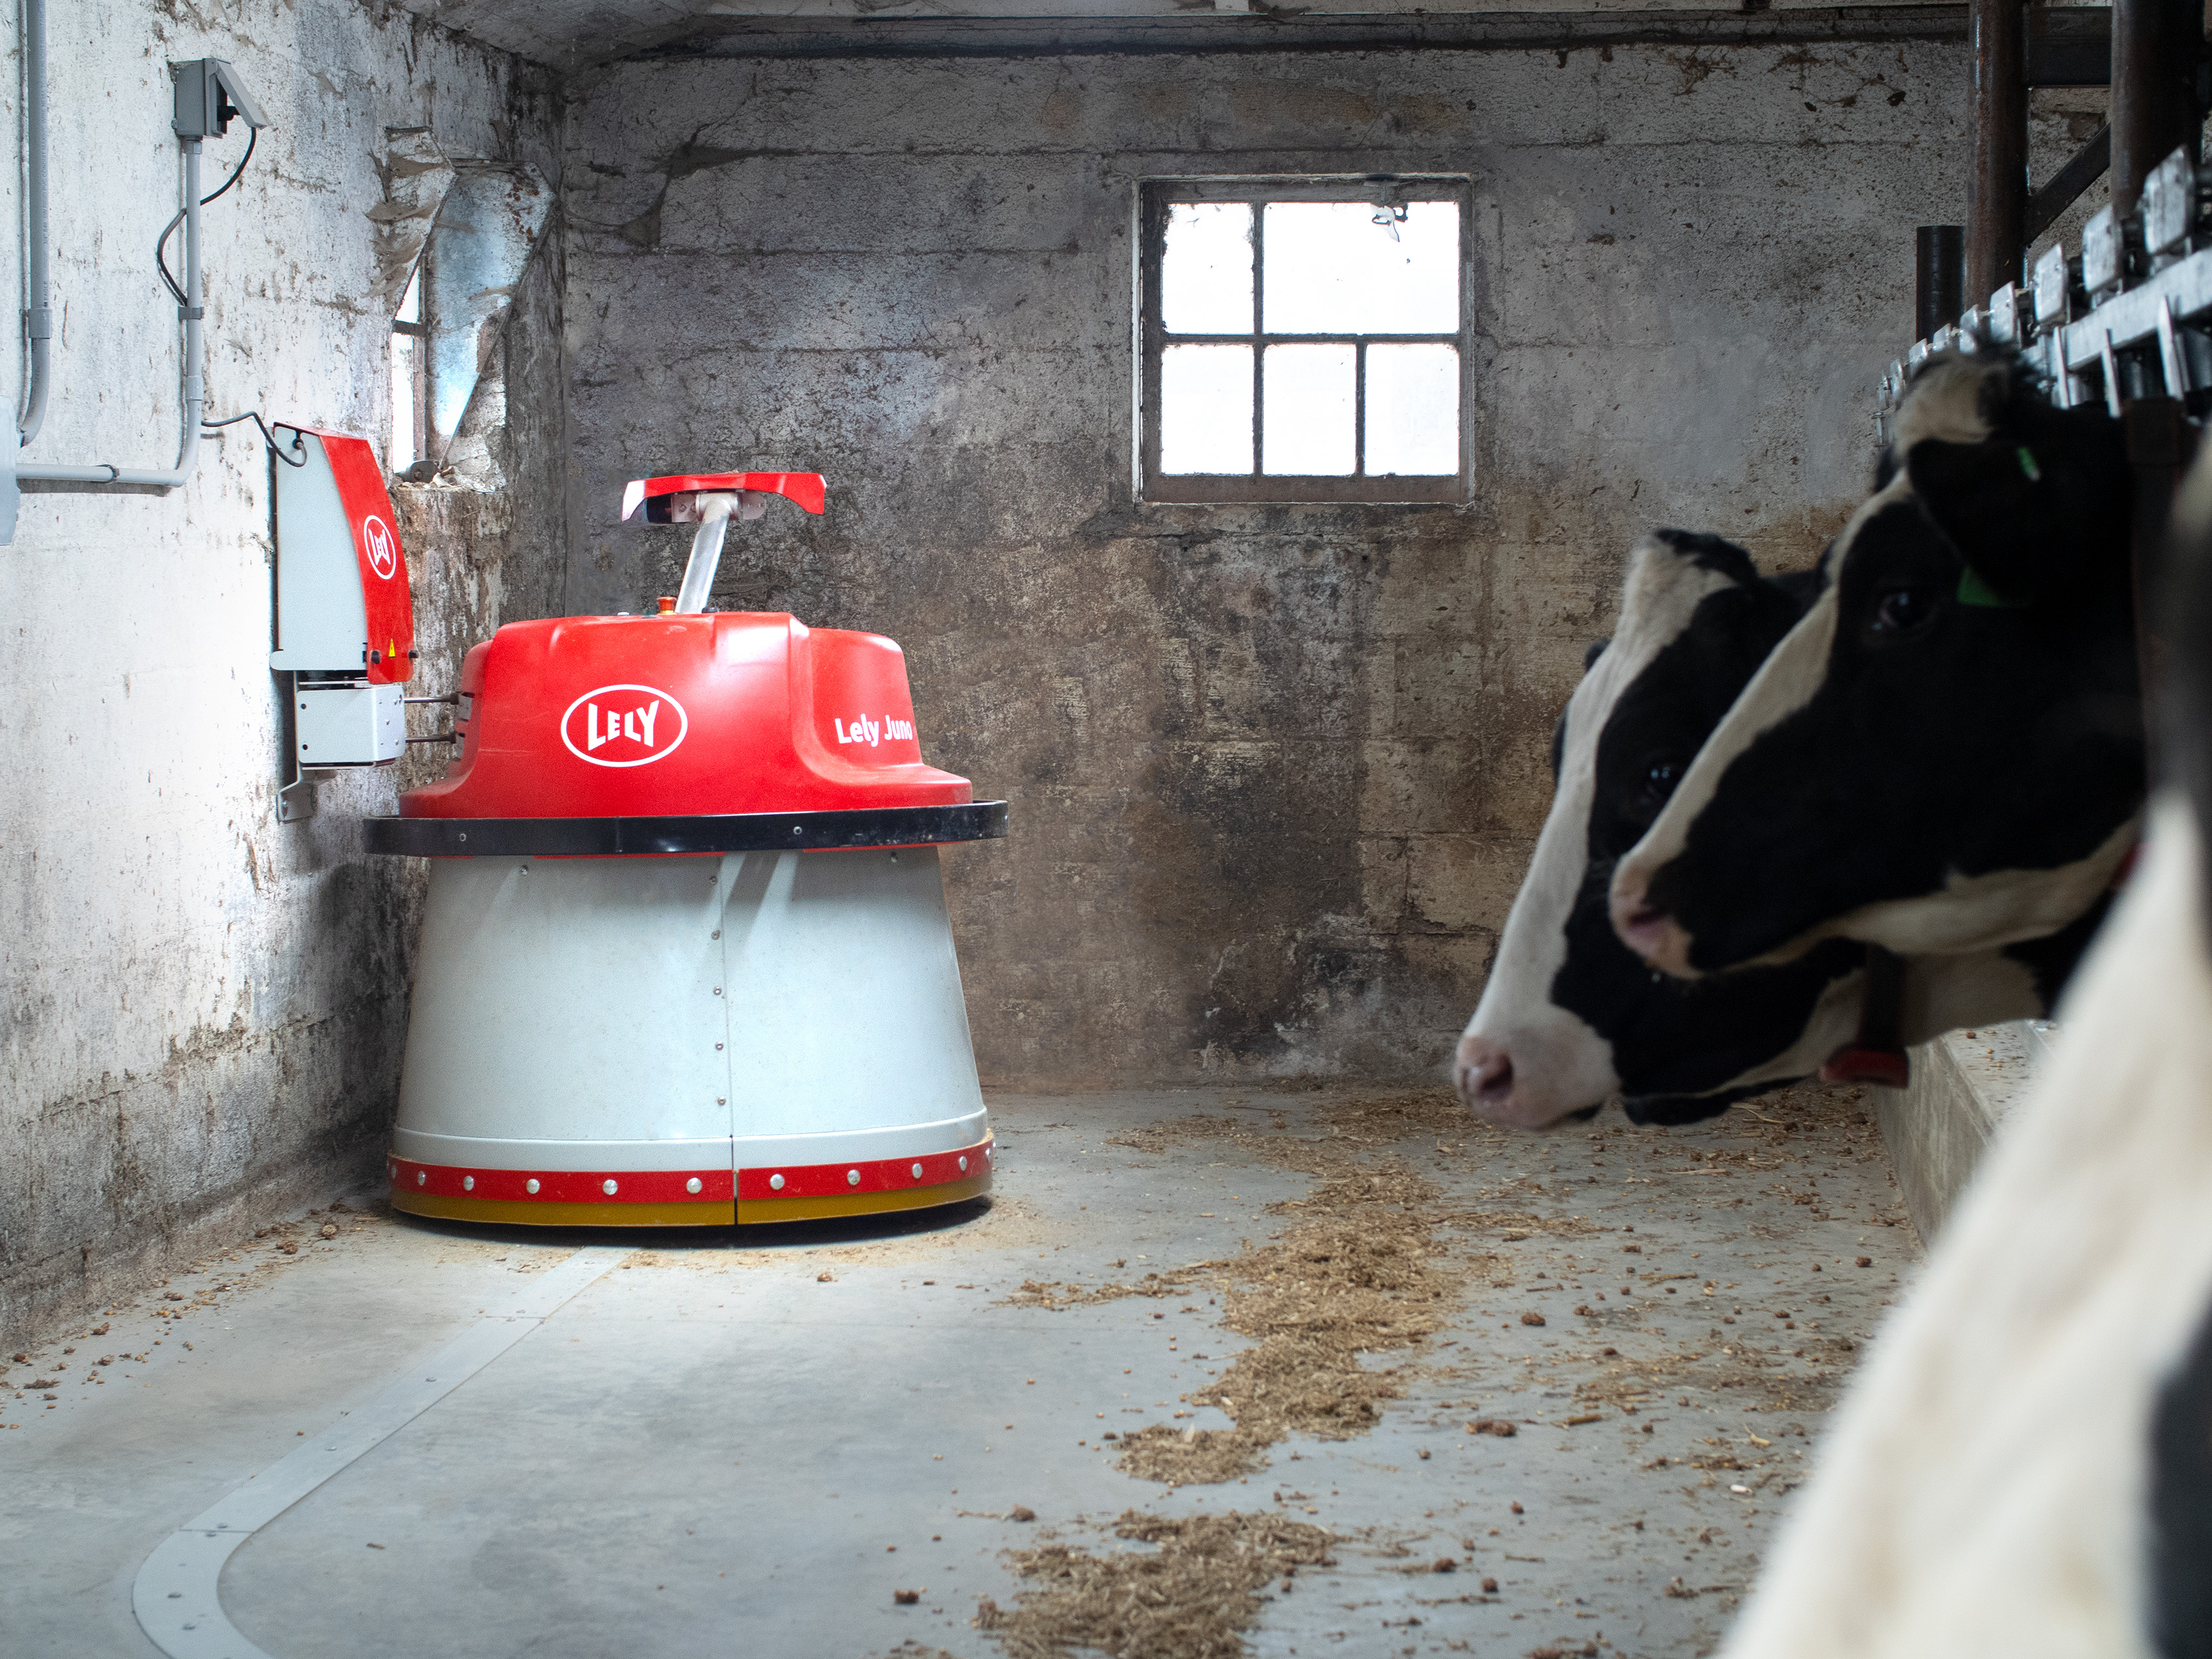 Lely Robot With Cows